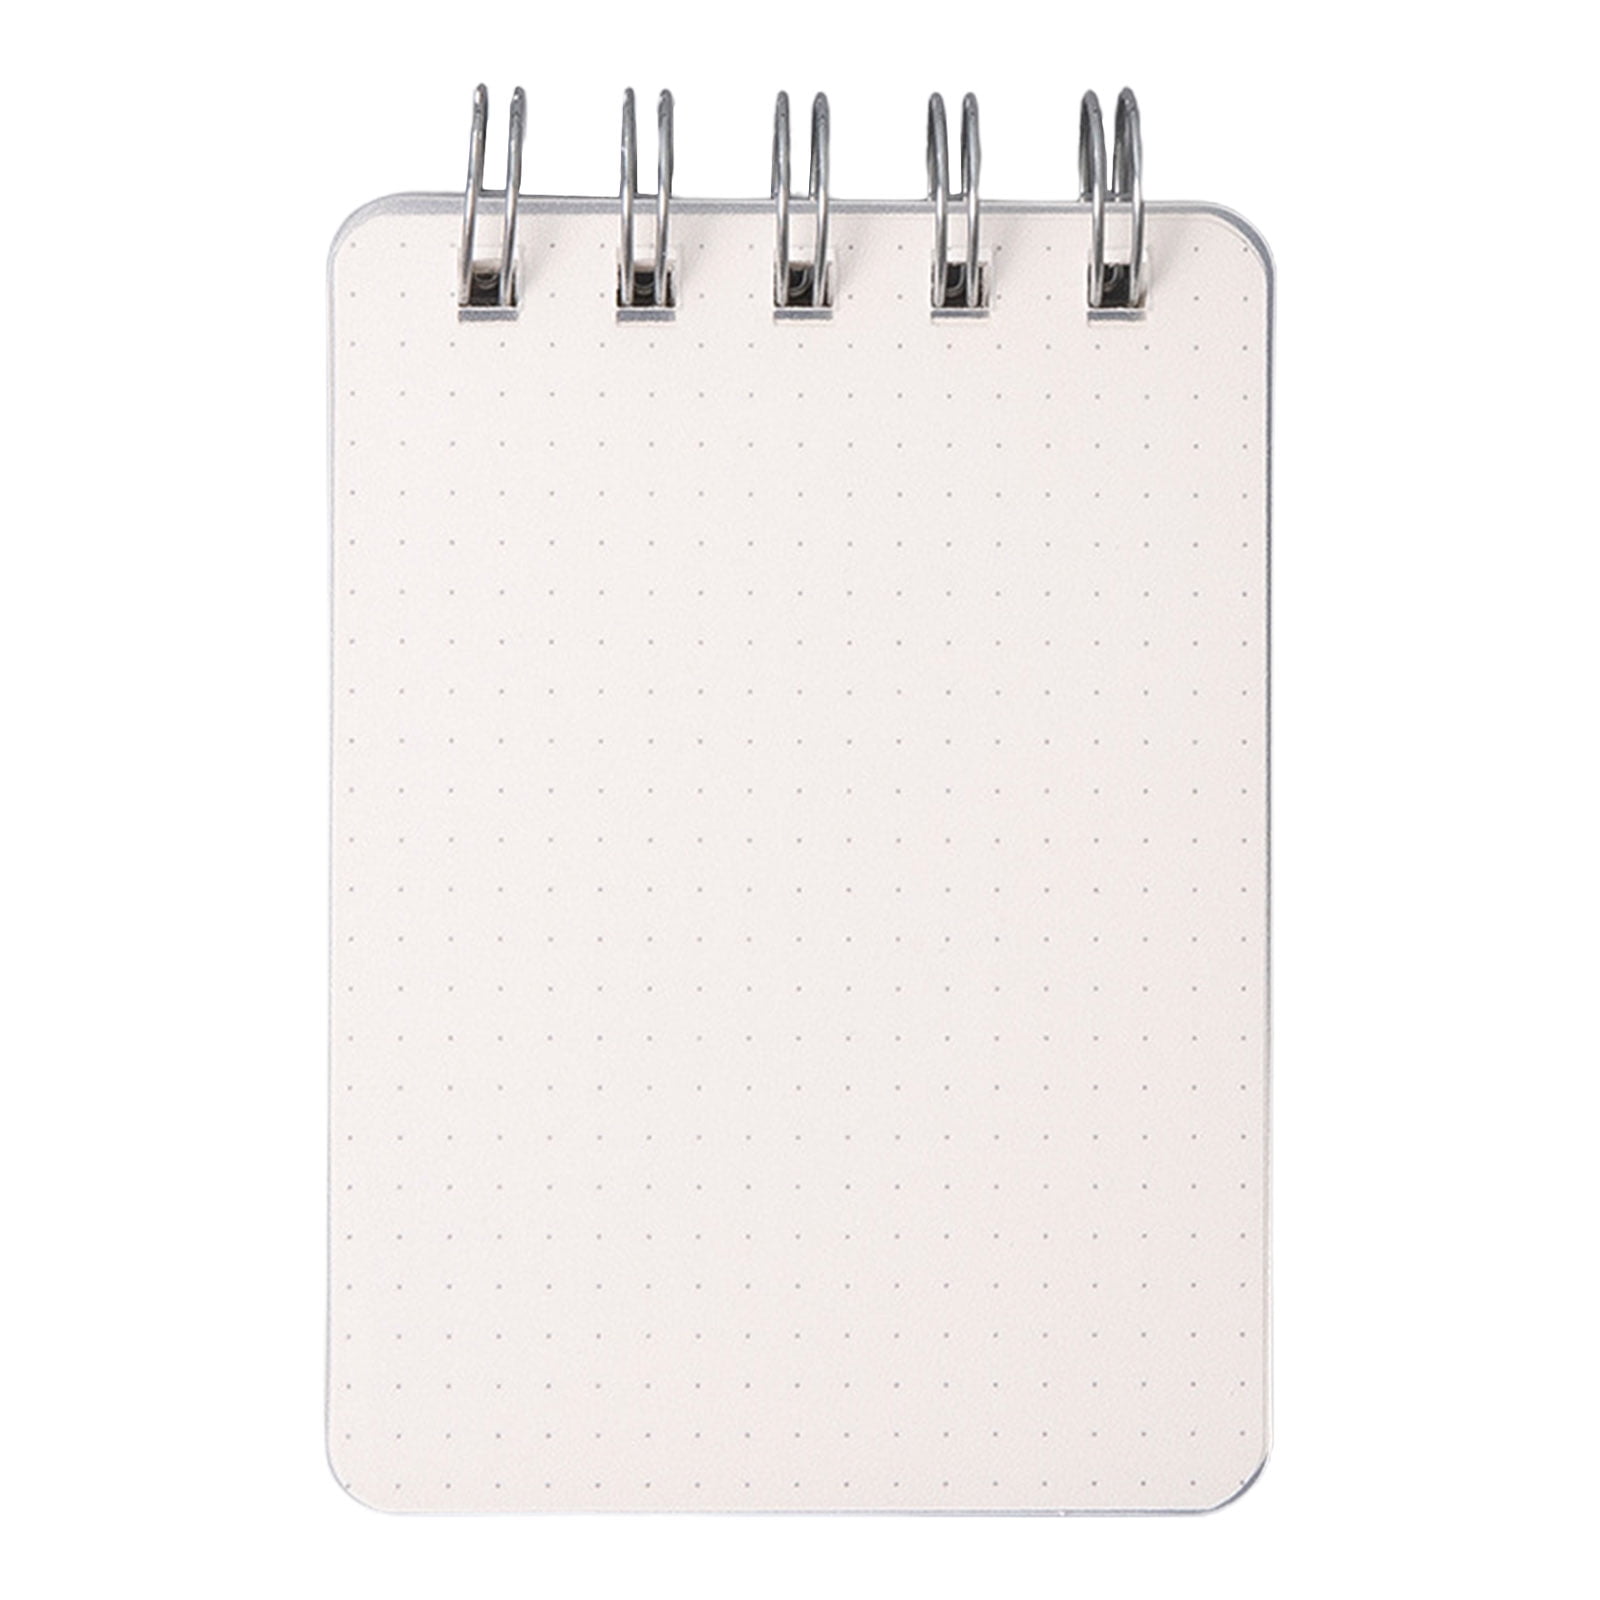 Frosted Mini Spiral Notebook Line / Grid / Blank / Dotting Note Pad 4.17x3.03 inch Memo Notepad for Home Office Travel, Horizontal Line